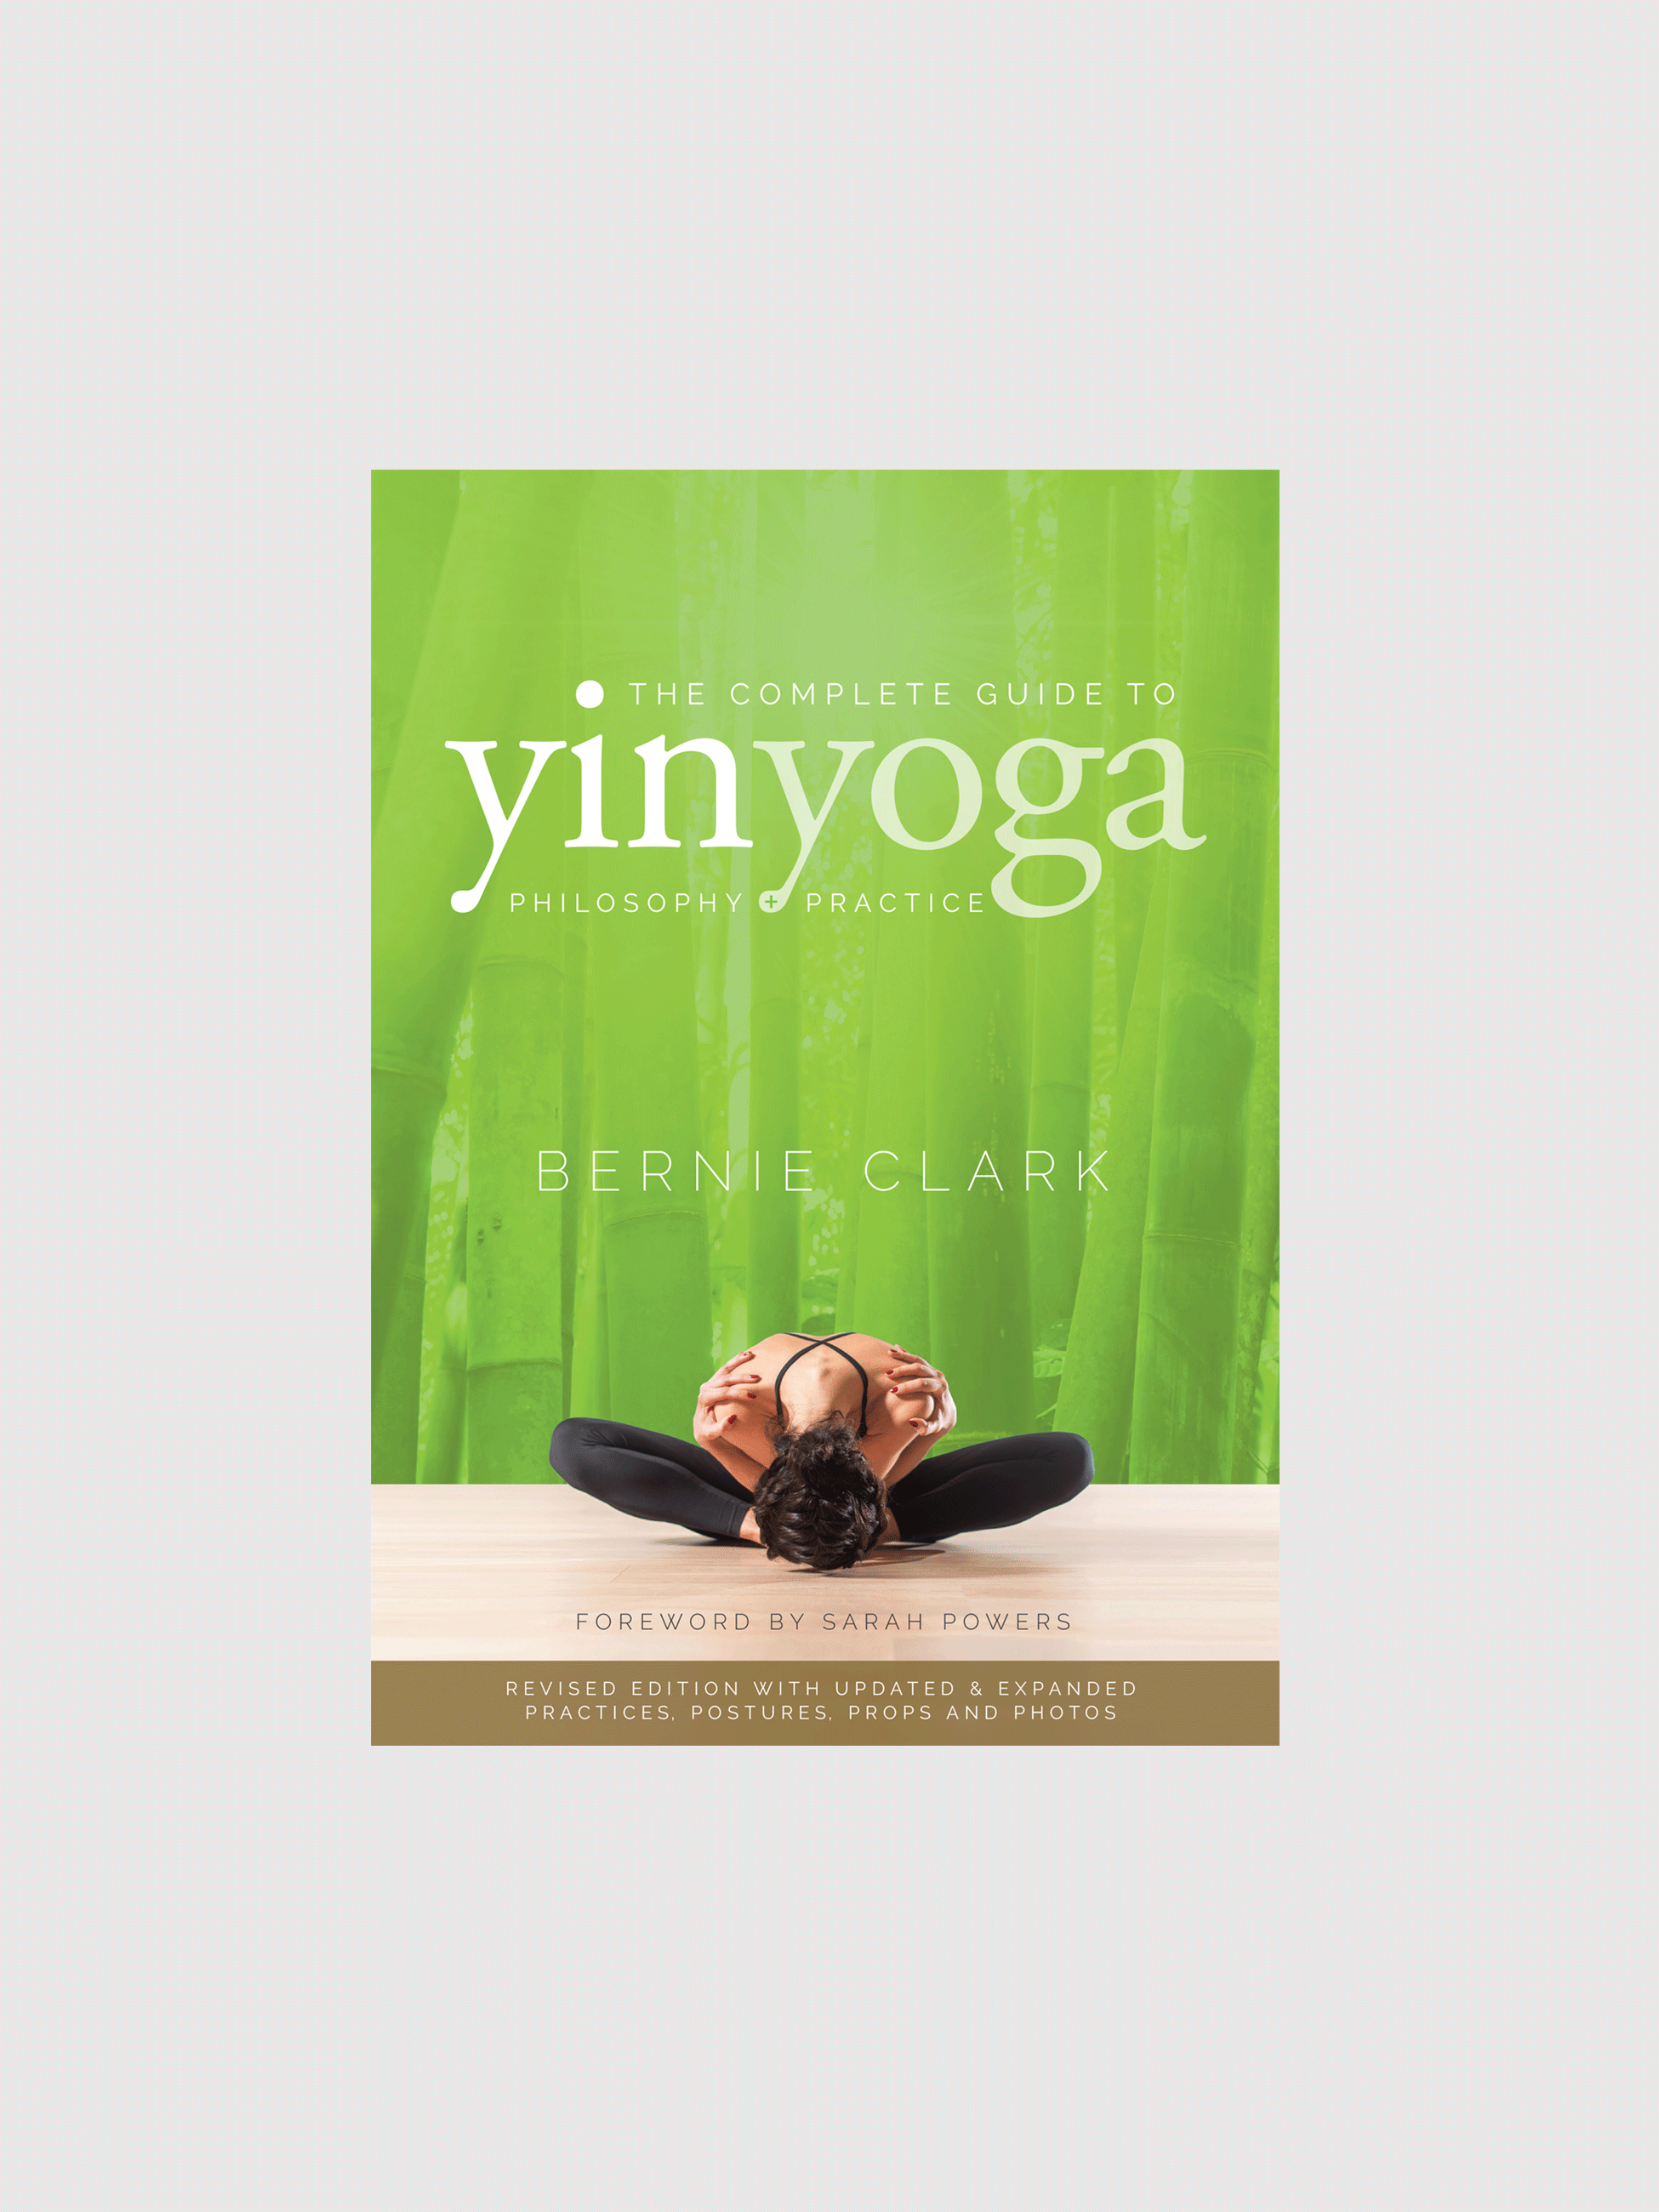 Book cover: Complete Guide to Yin Yoga by Bernie Clark